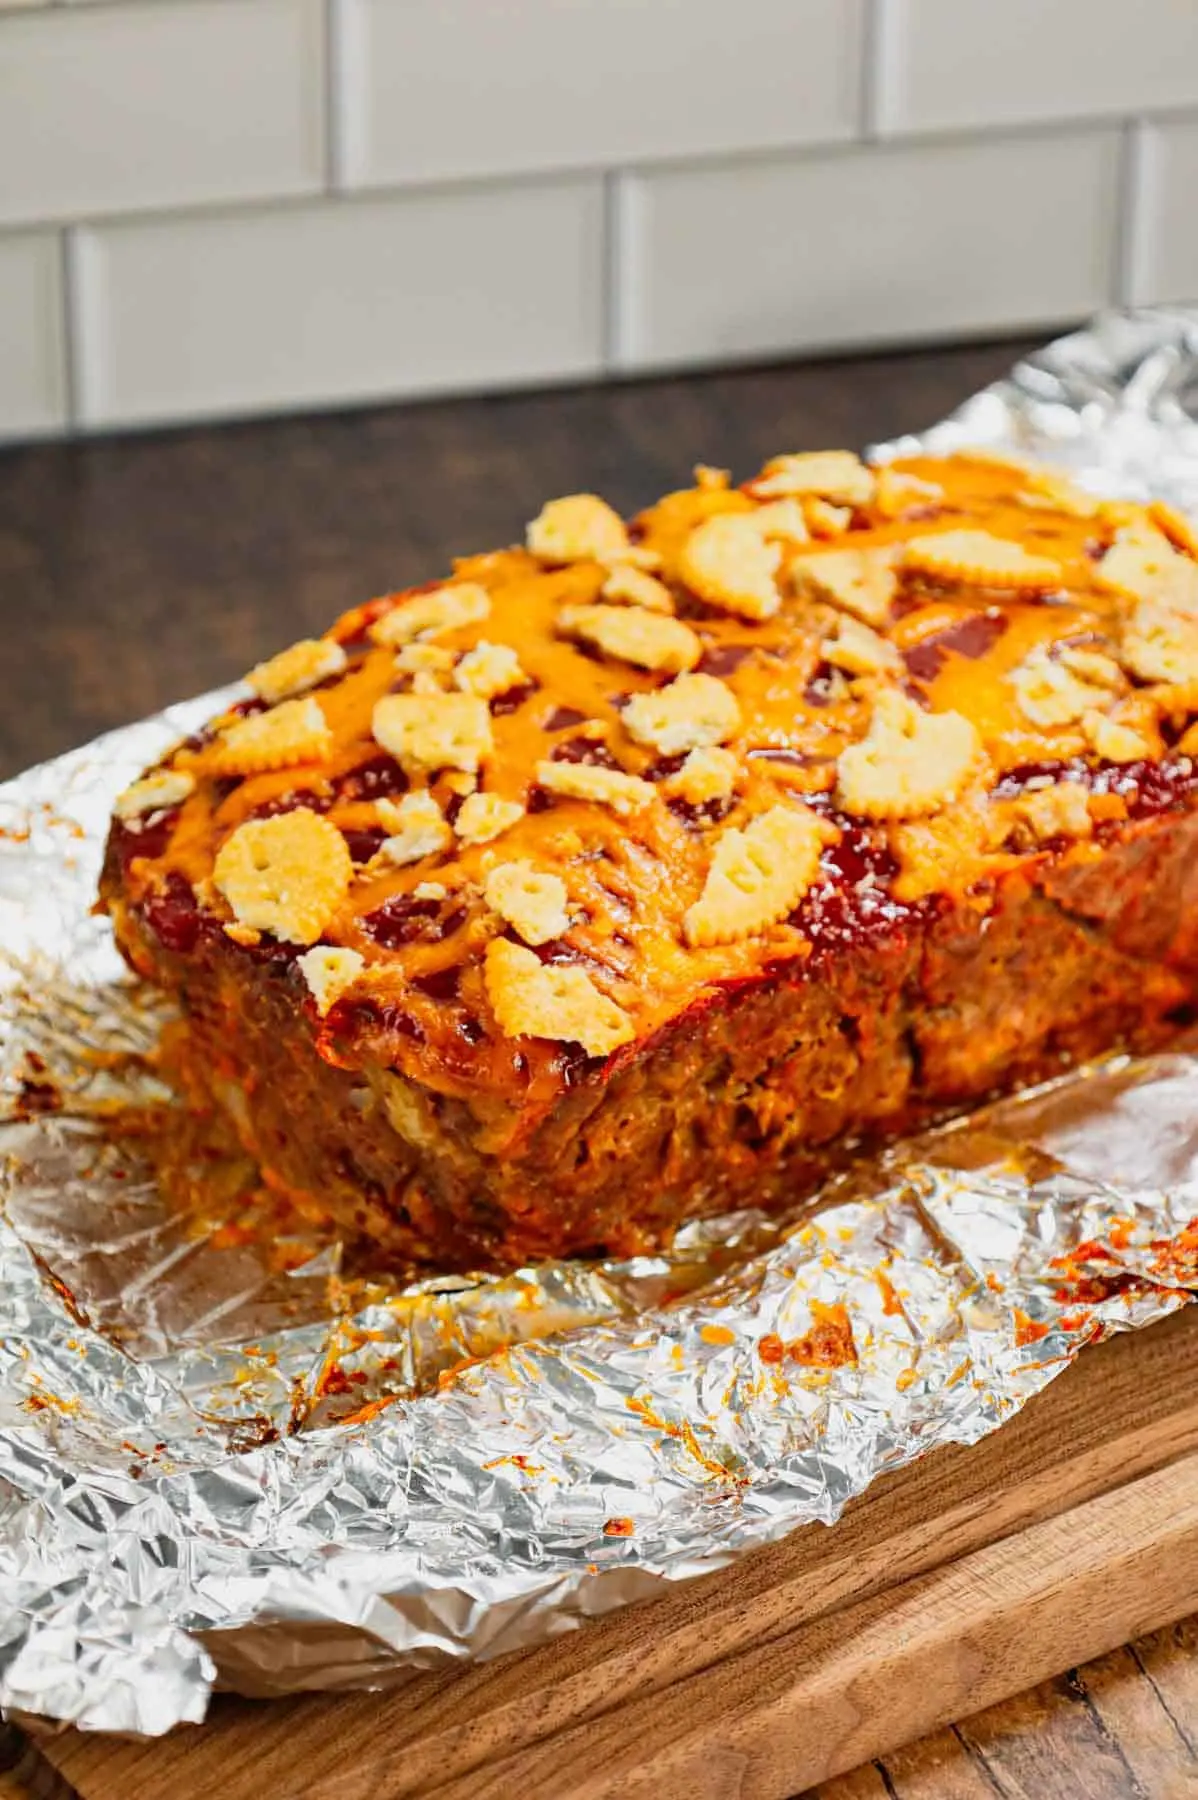 Ritz Cracker Meatloaf is a delicious ground beef meatloaf loaded with crushed Ritz crackers, onion soup mix, onions, green bell peppers and cheddar cheese.